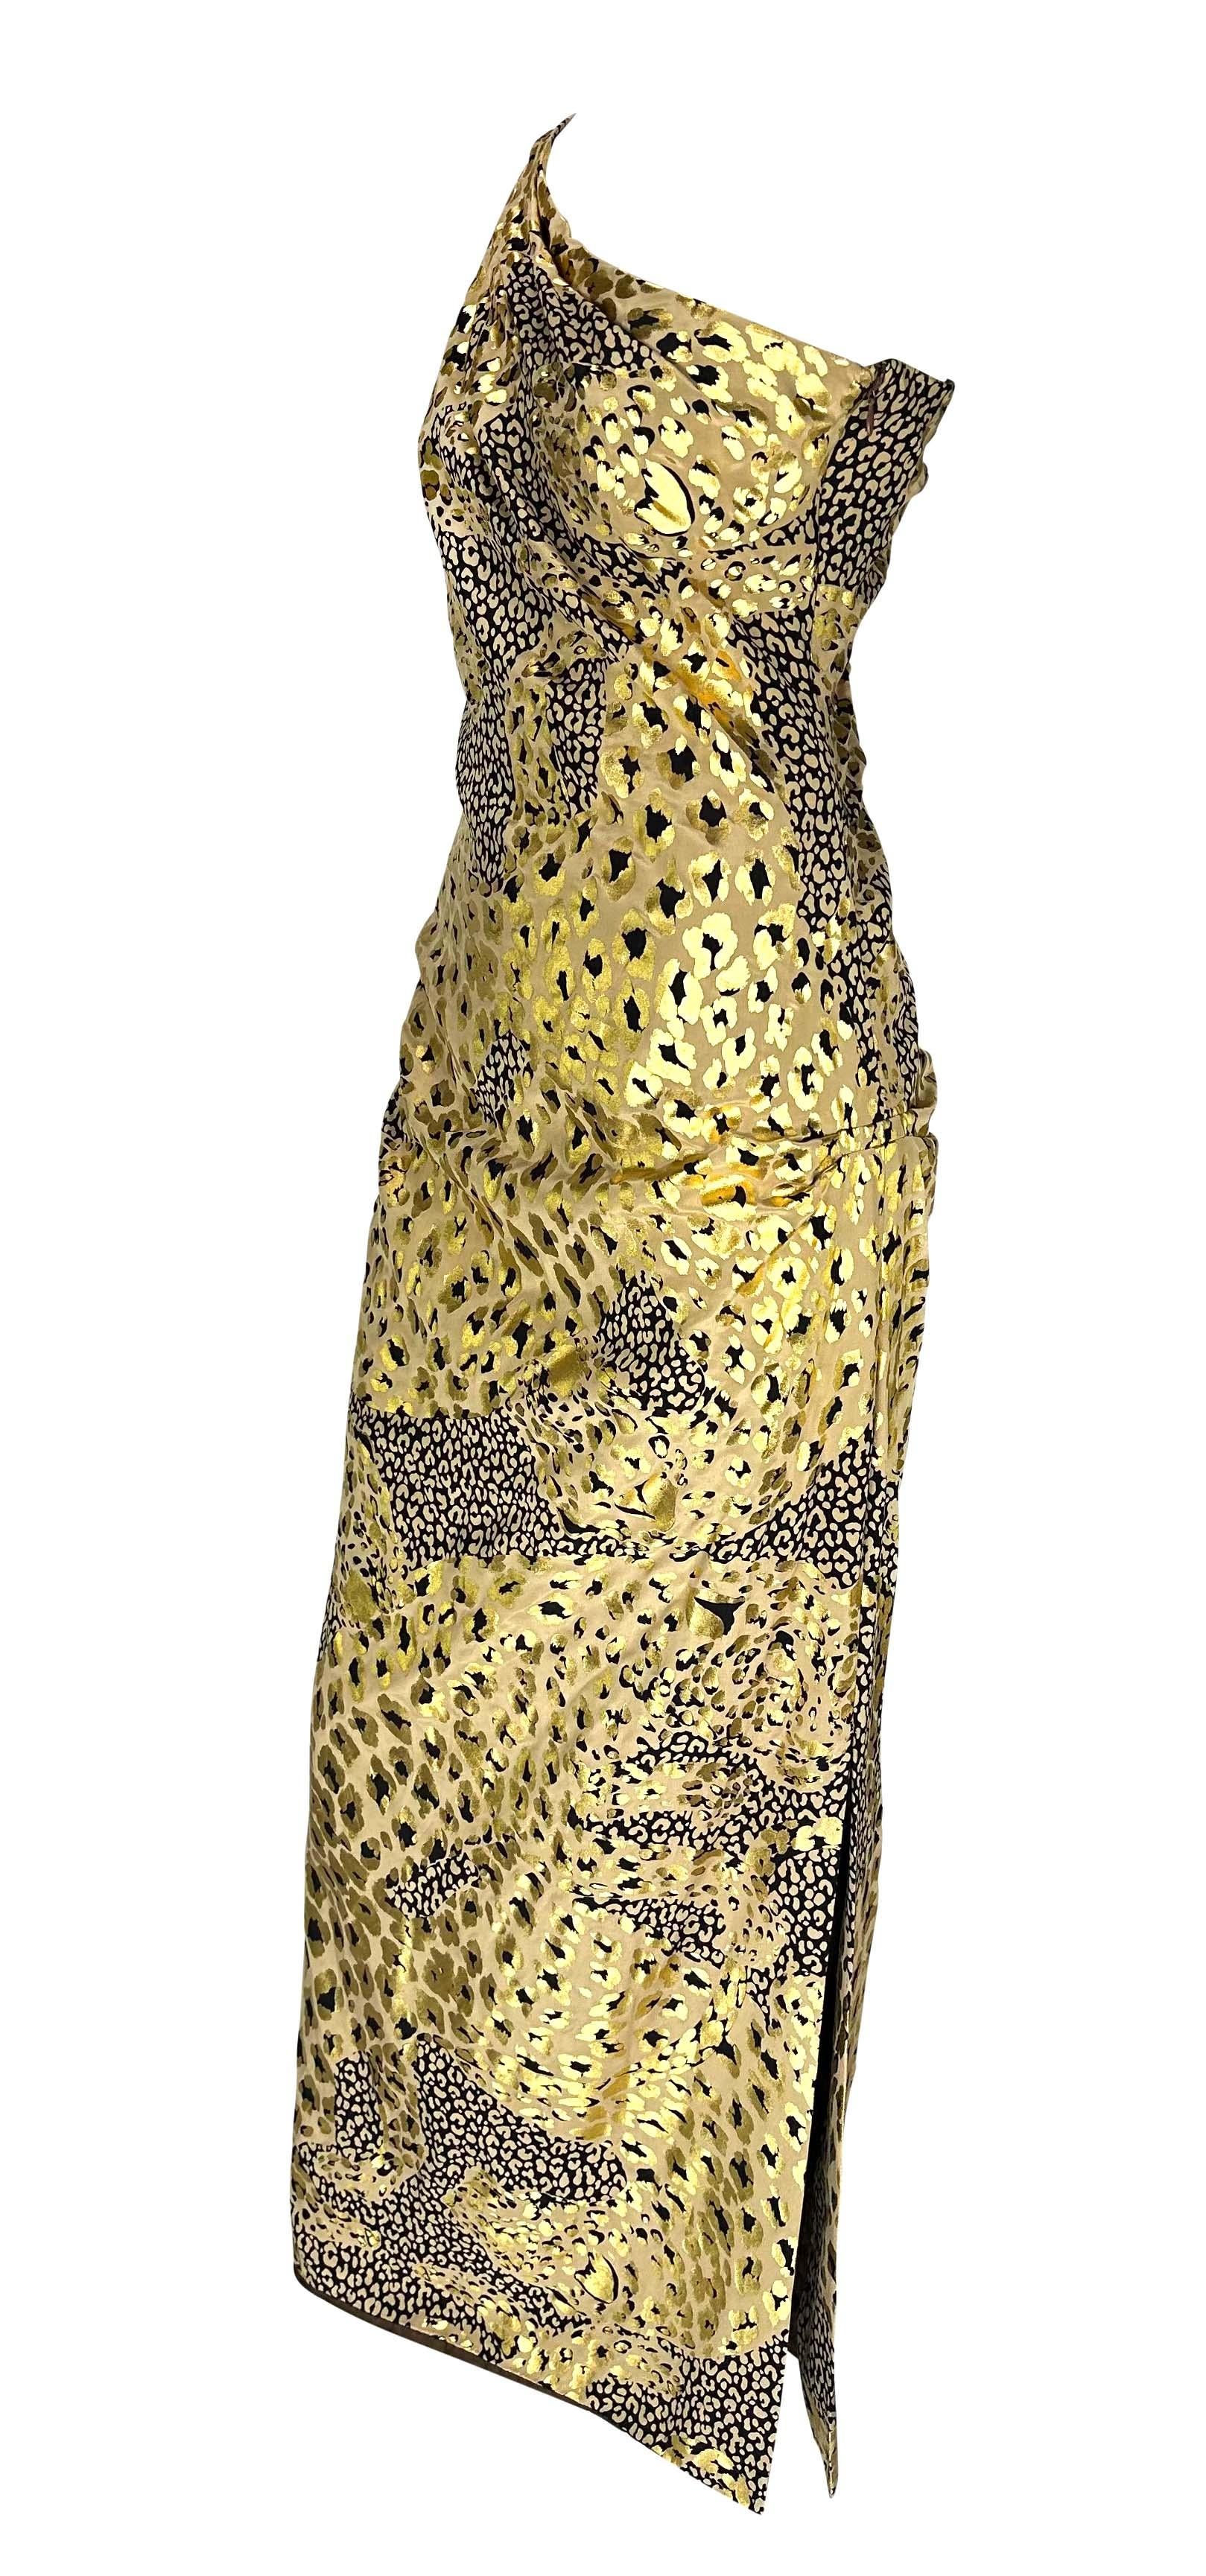 F/W 1992 Yves Saint Laurent Runway Gold Metallic Leopard Print Asymmetric Gown In Good Condition For Sale In West Hollywood, CA